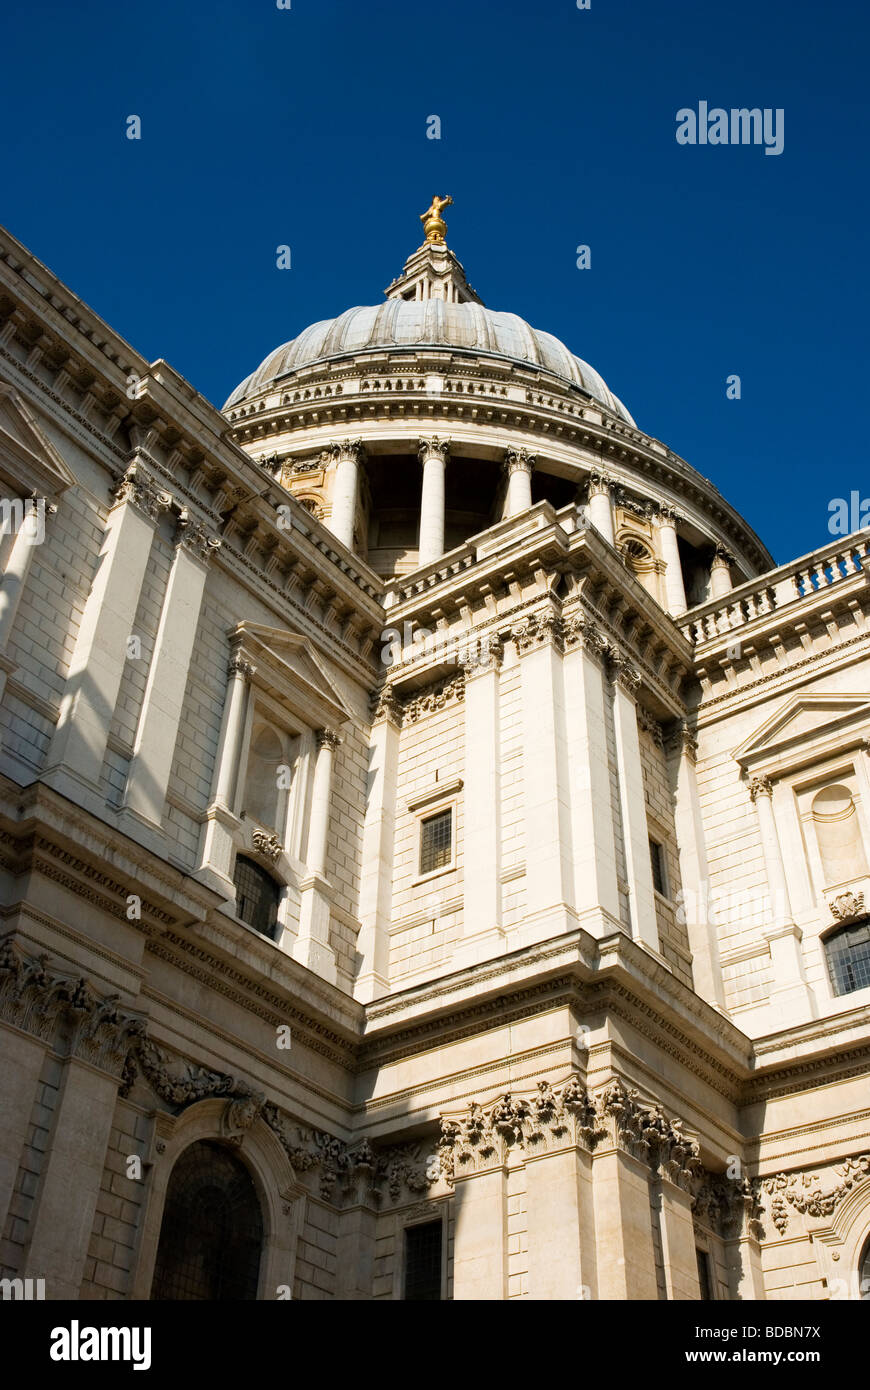 The dome of St Paul's Cathedral against the blue sky in city of London England UK Stock Photo